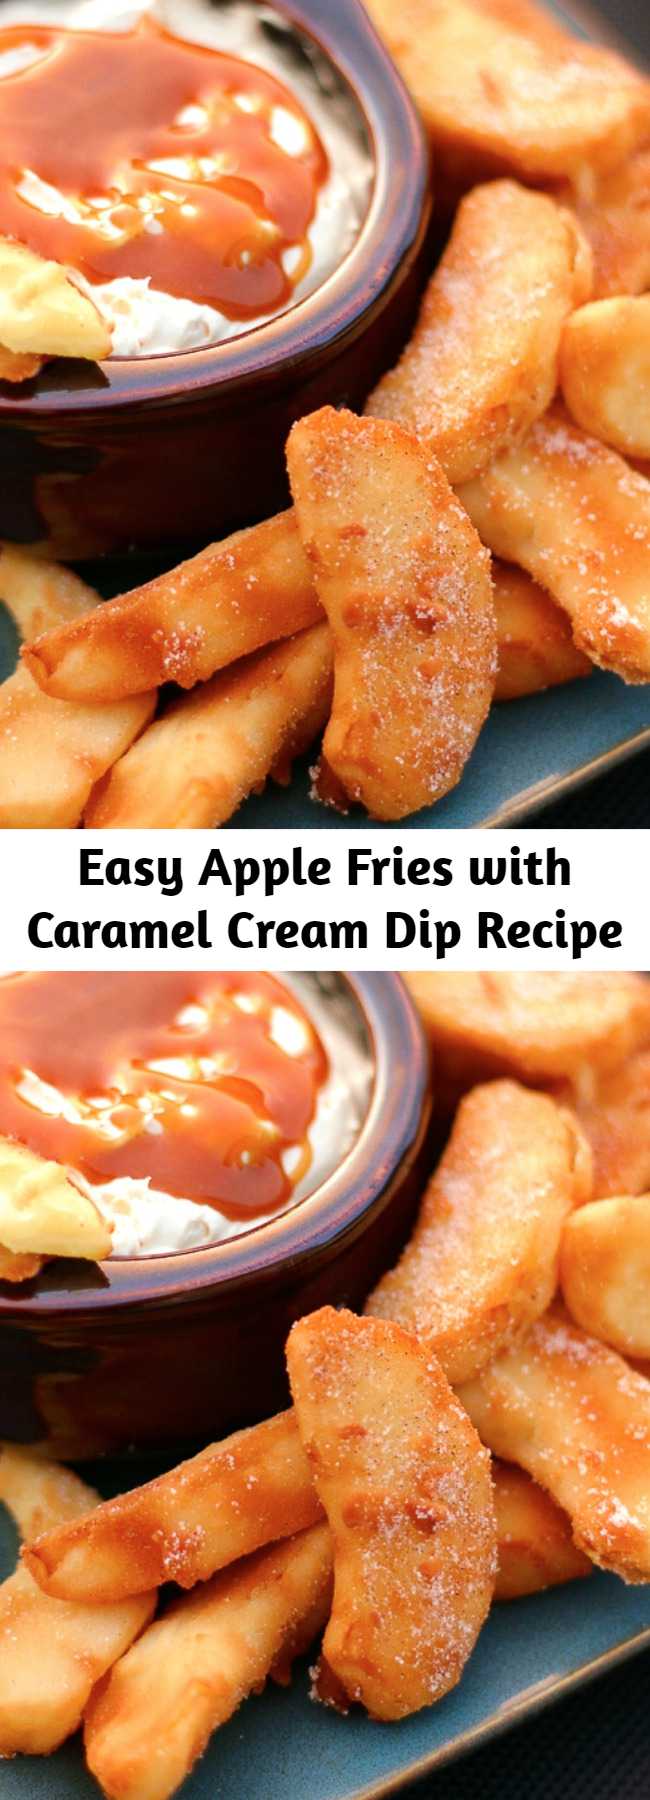 Easy Apple Fries with Caramel Cream Dip Recipe - These Apple Fries with Caramel Cream Dip are the perfect warm dessert for a crisp fall evening. It made our house smell like apple pie. Crisp apple wedges are lightly battered and fried in a pan, then sprinkled with a cinnamon-sugar mix. What really sets these fried apples apart is the dipping sauce. You’ll love this creamy, caramel-infused dip.